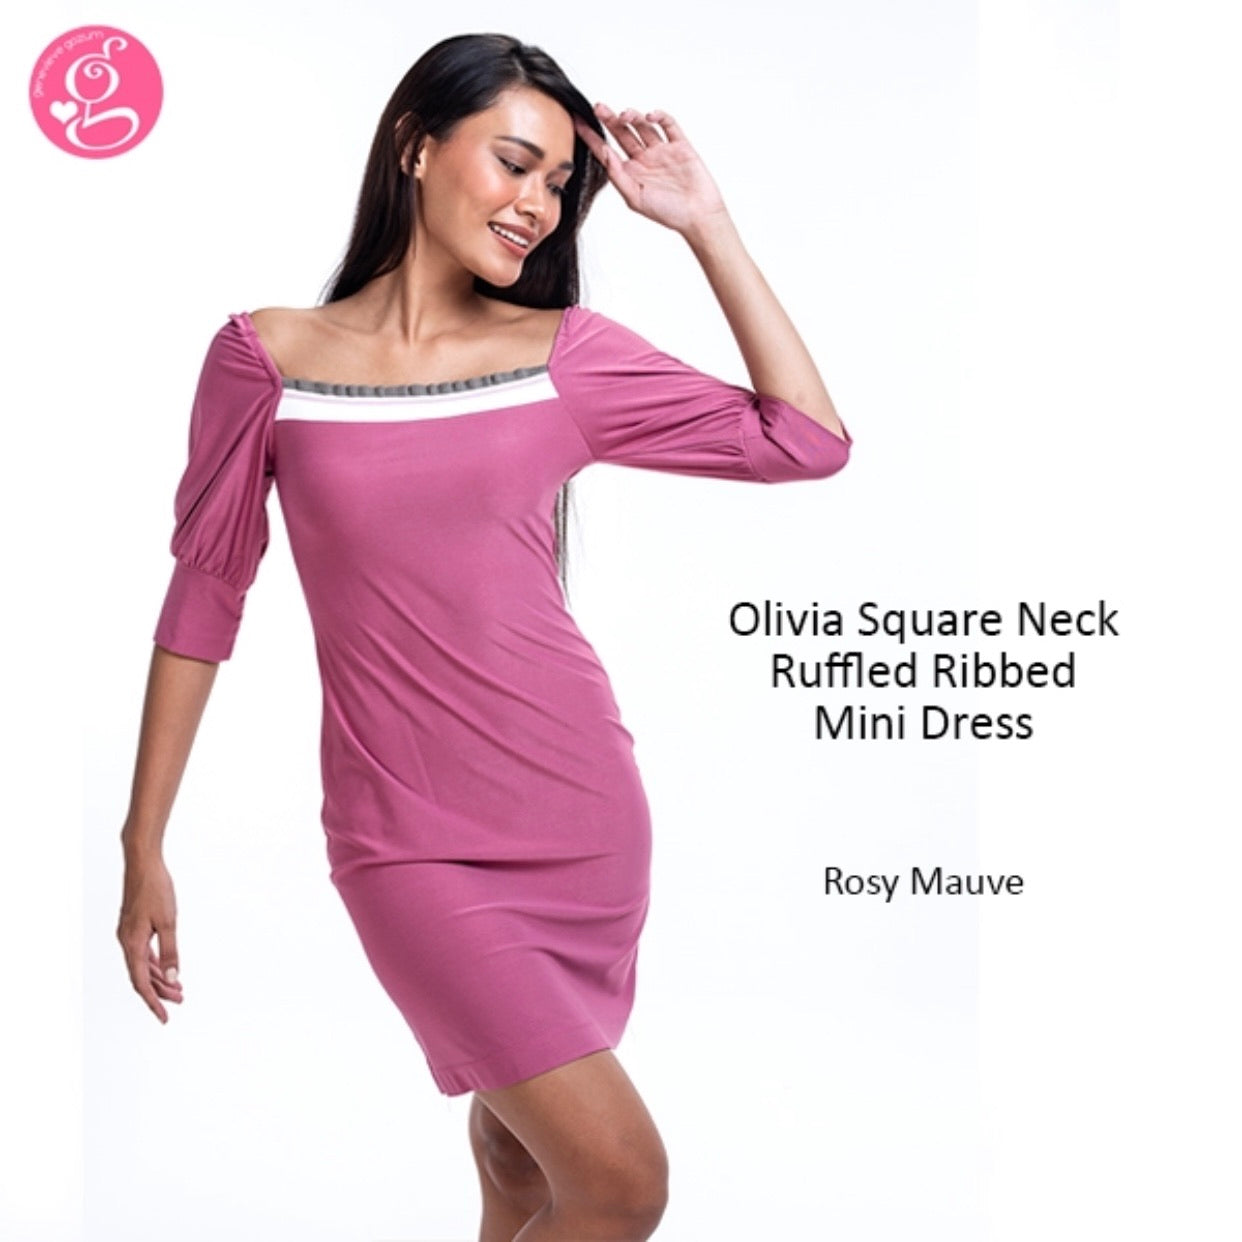 Olivia Square Neck Ruffle Ribbed Dress or Blouse (price separately)